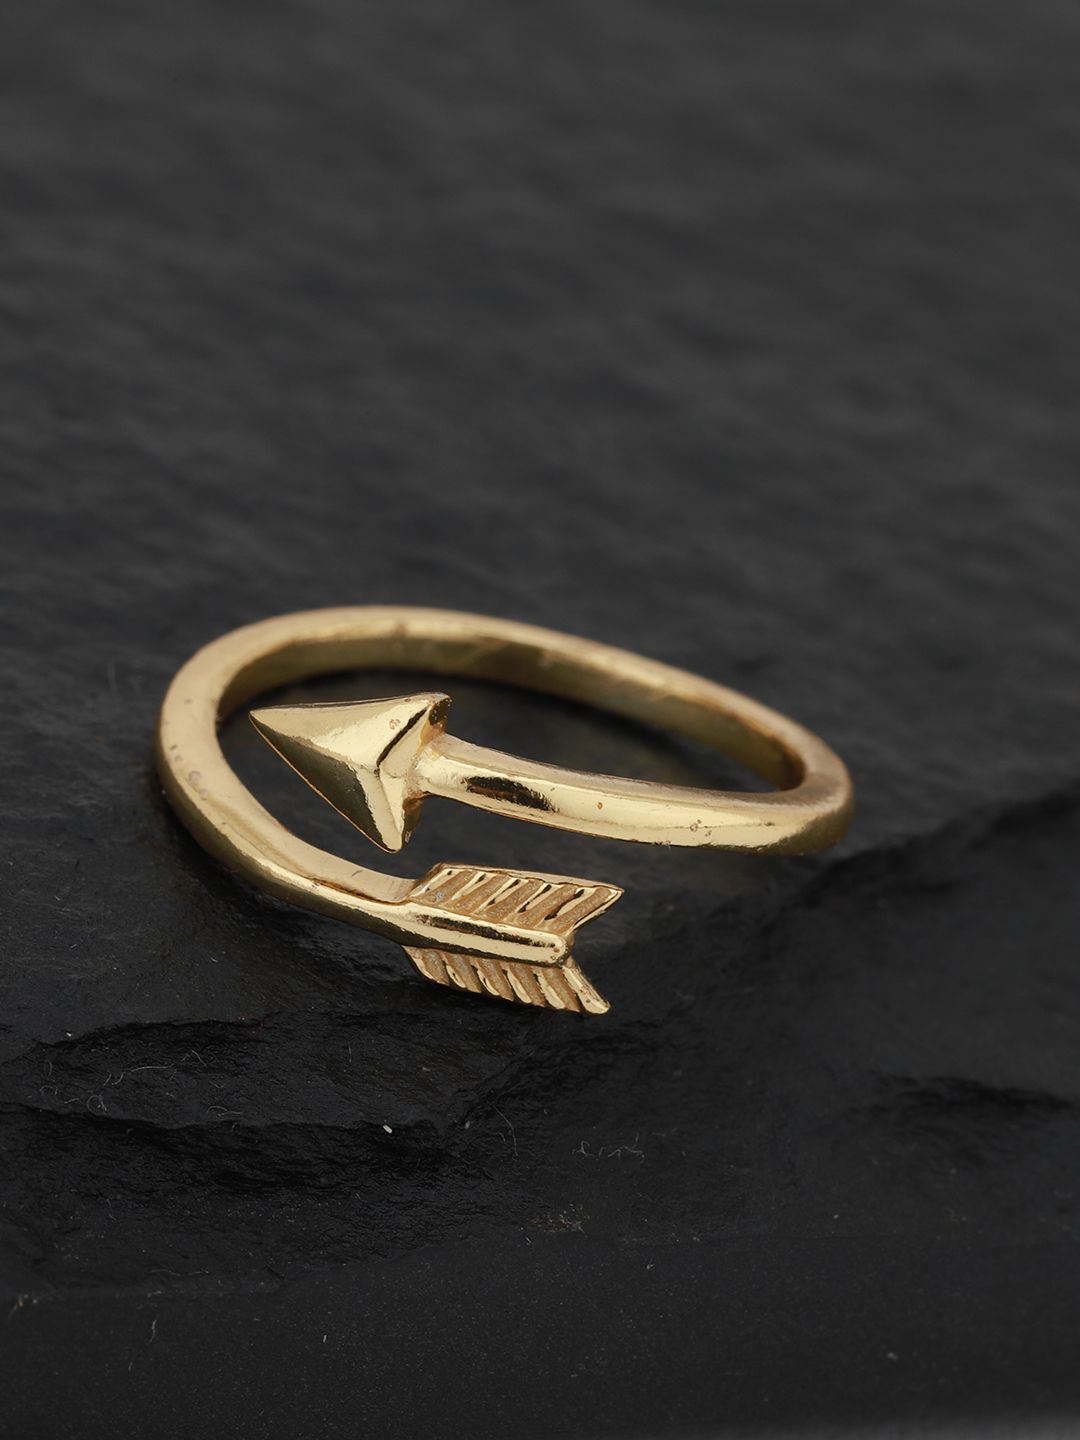 Carlton London Gold-Plated Adjustable Finger Ring Price in India